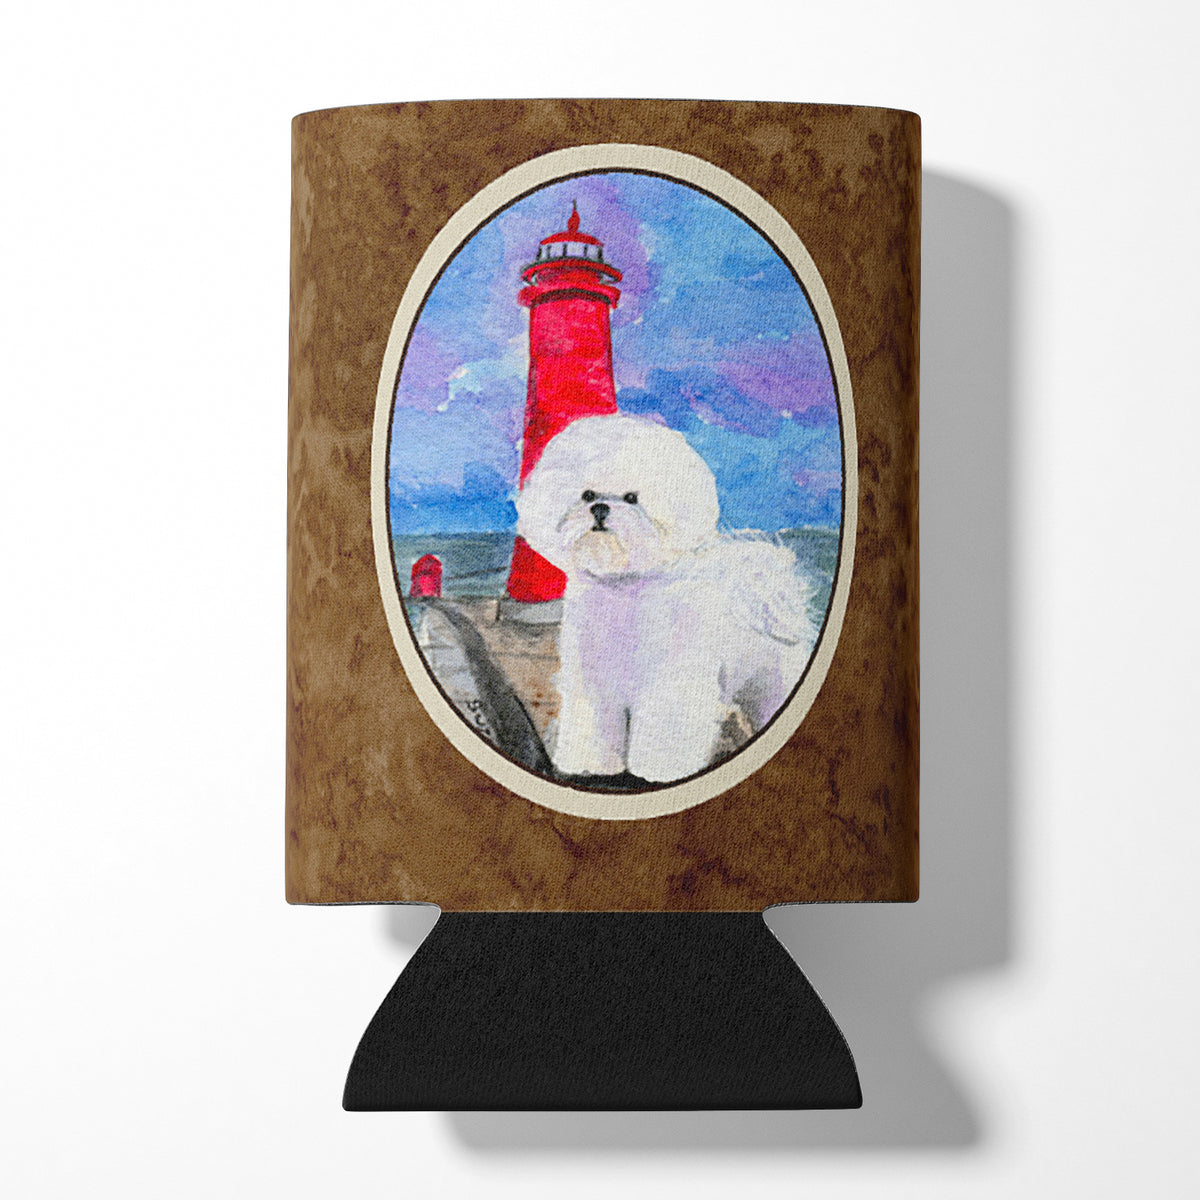 Lighthouse with Bichon Frise Can or Bottle Beverage Insulator Hugger.